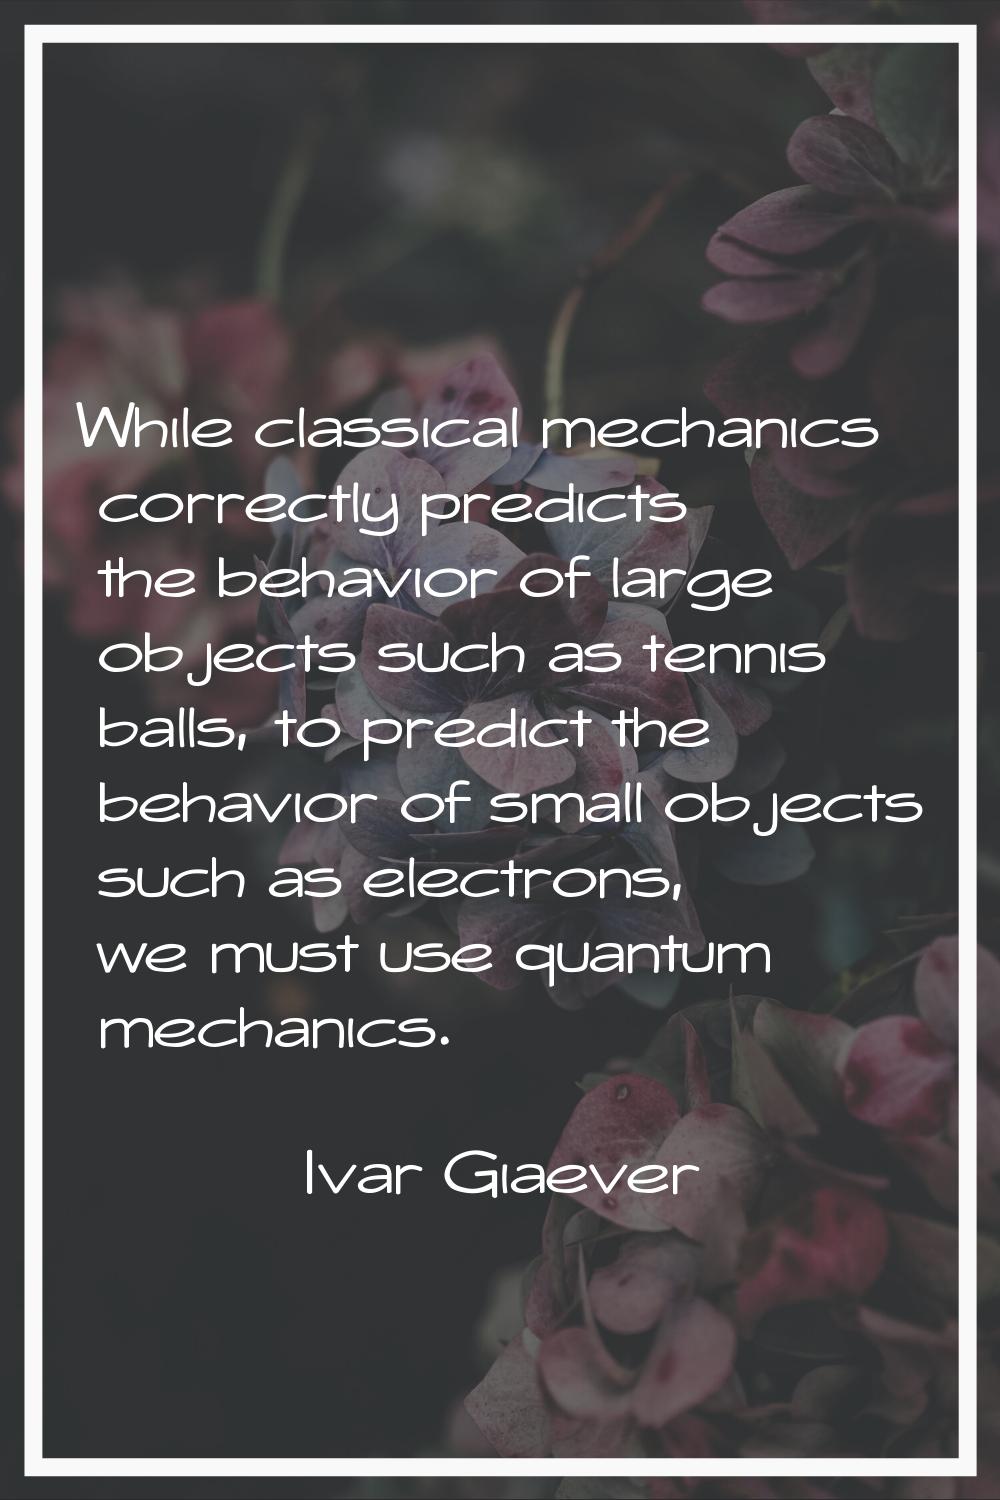 While classical mechanics correctly predicts the behavior of large objects such as tennis balls, to